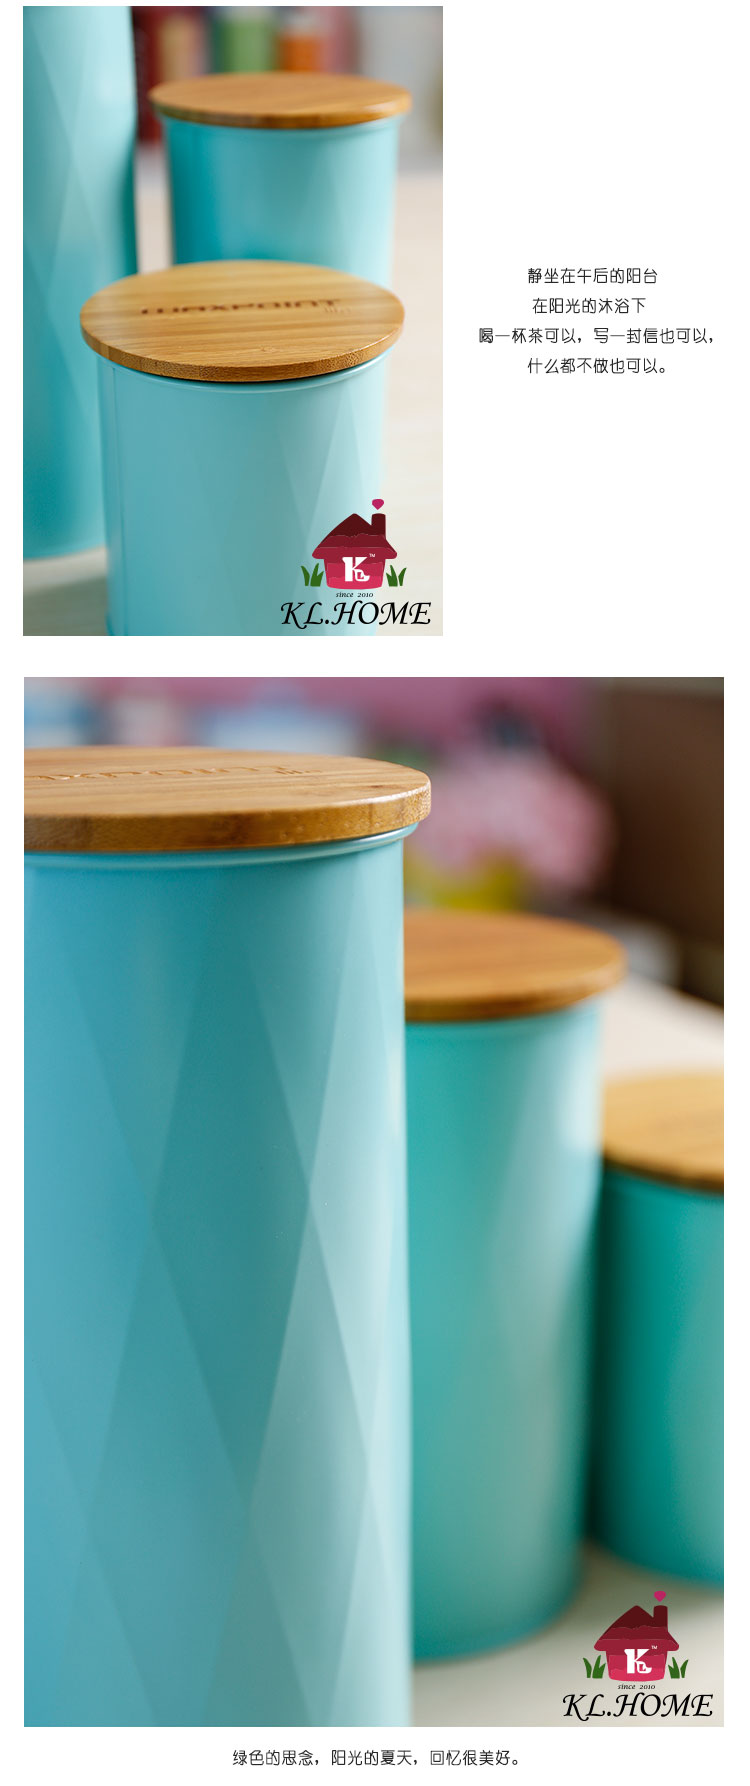 New fashion high school low storage tank bamboo cover Tea Coffee Canister canister maxpoint5